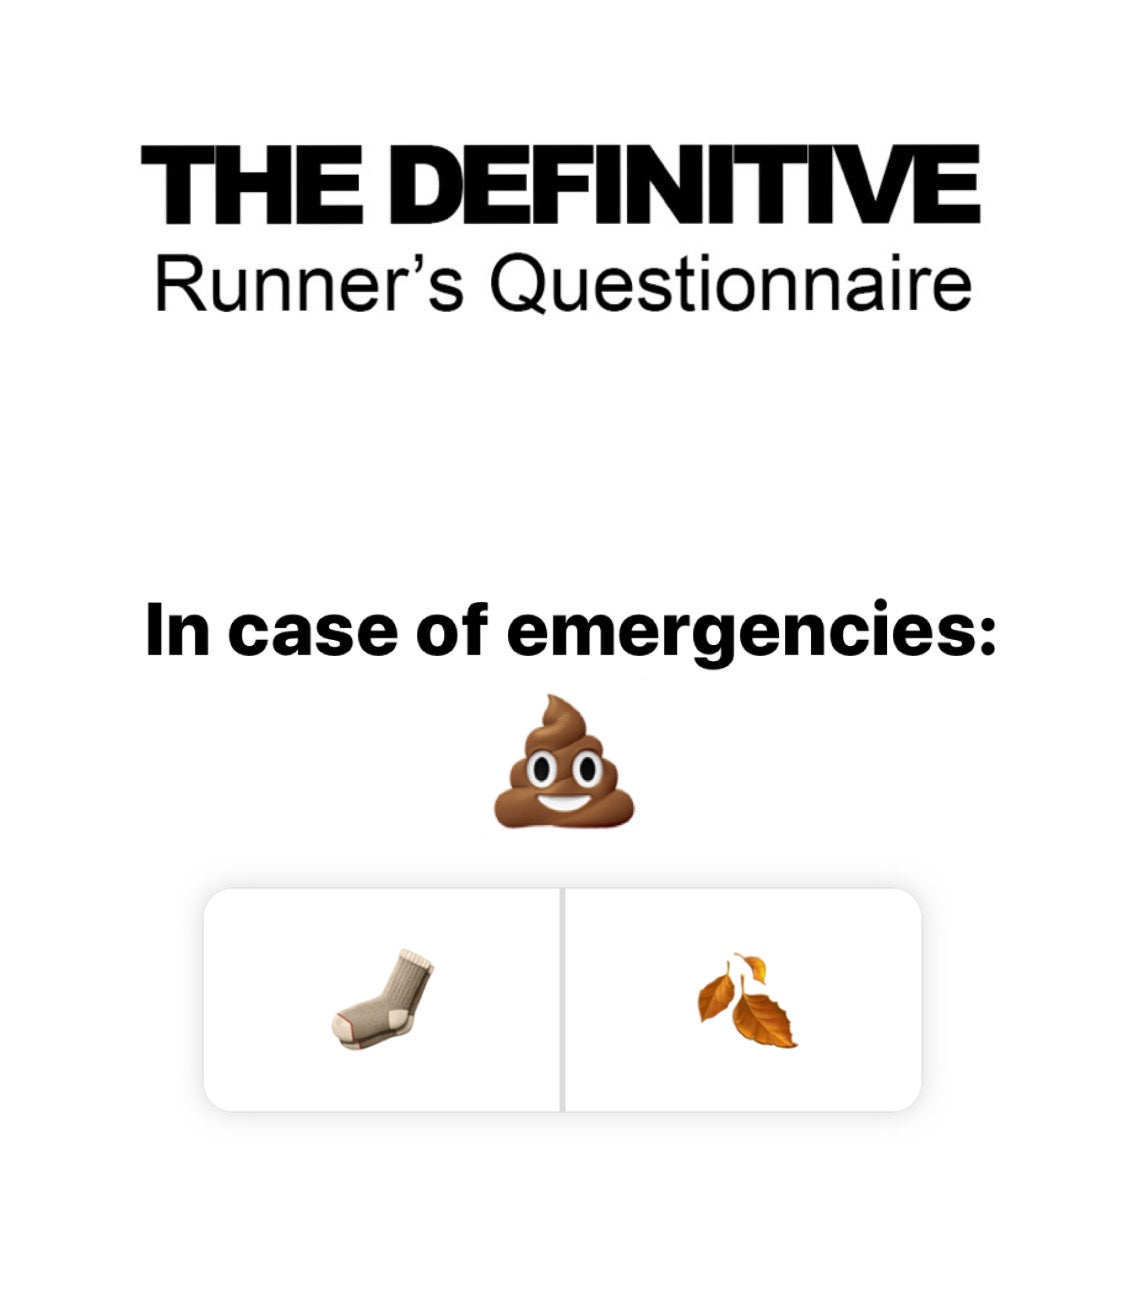 The Definitive Runner's Questionnaire